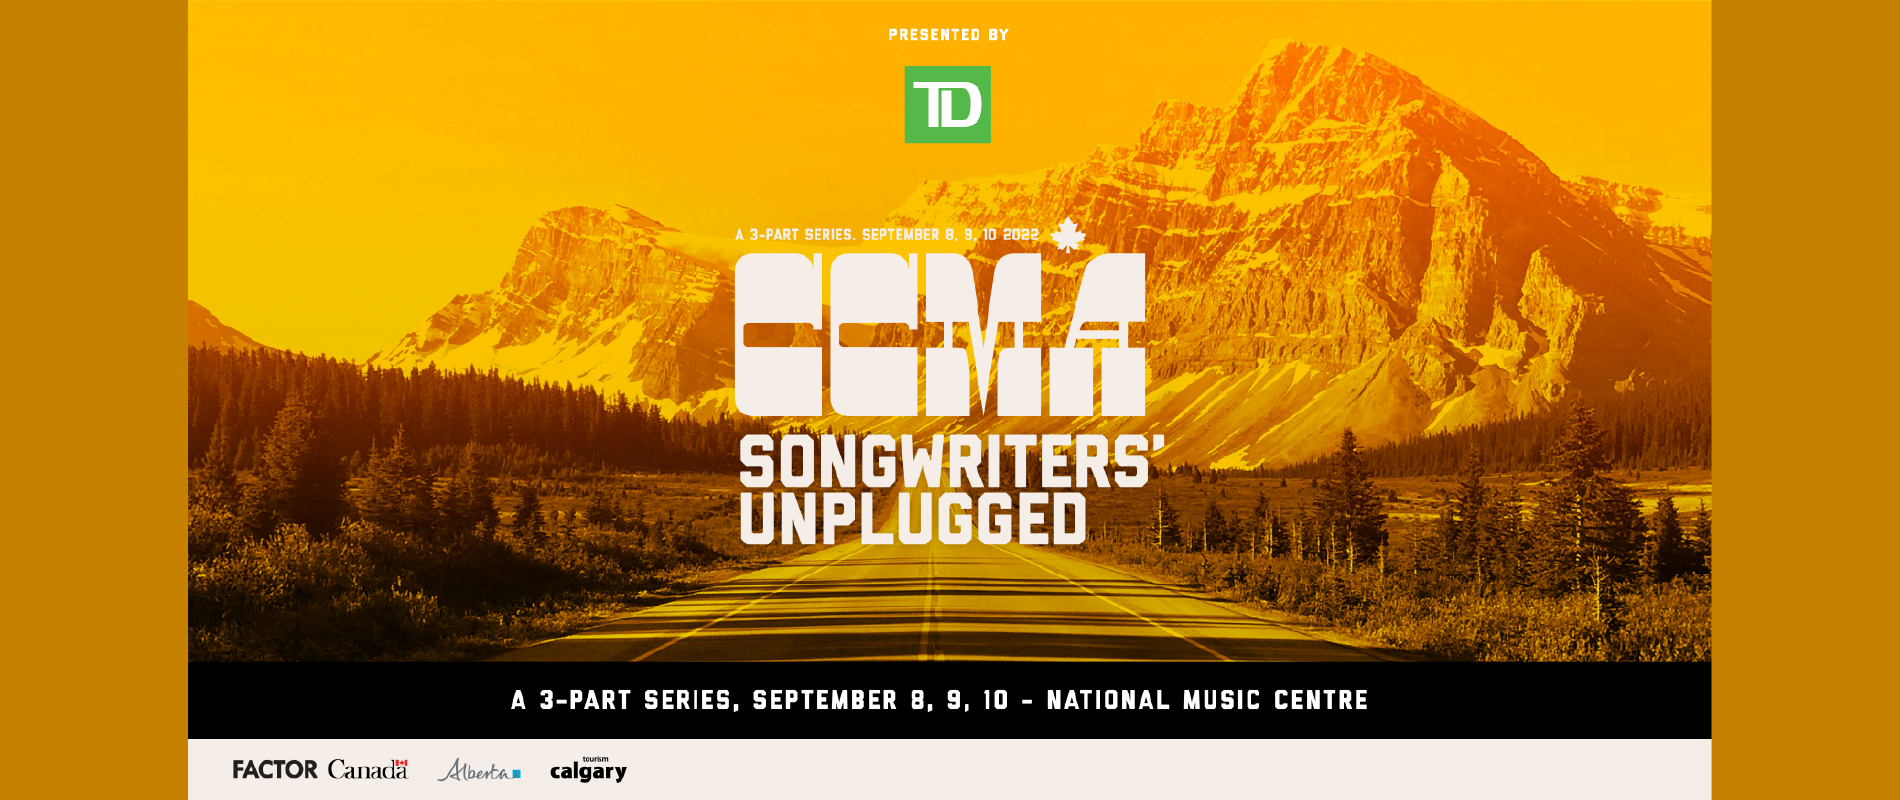 CCMA Songwriters' Unplugged Presented by TD: Session 1